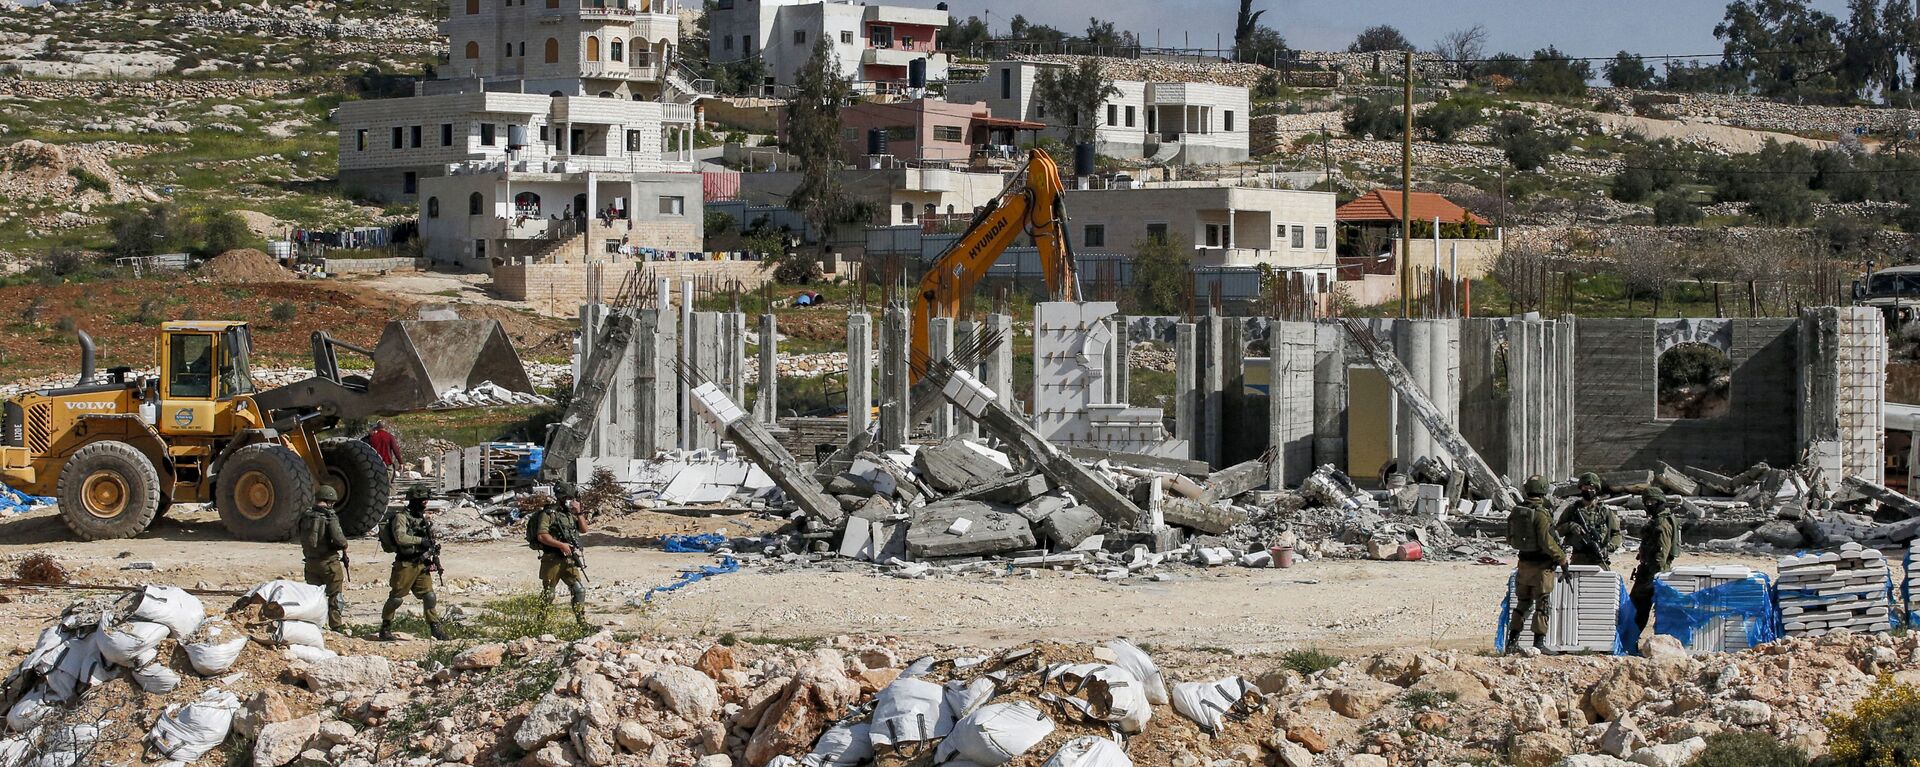 Israeli soldiers stand by as excavators demolish a Palestinian house (still under construction) located within the area C (where Israel retains full control over planning and construction) southeast of Hebron in the occupied West Bank on March 8, 2021. - Sputnik International, 1920, 08.07.2021